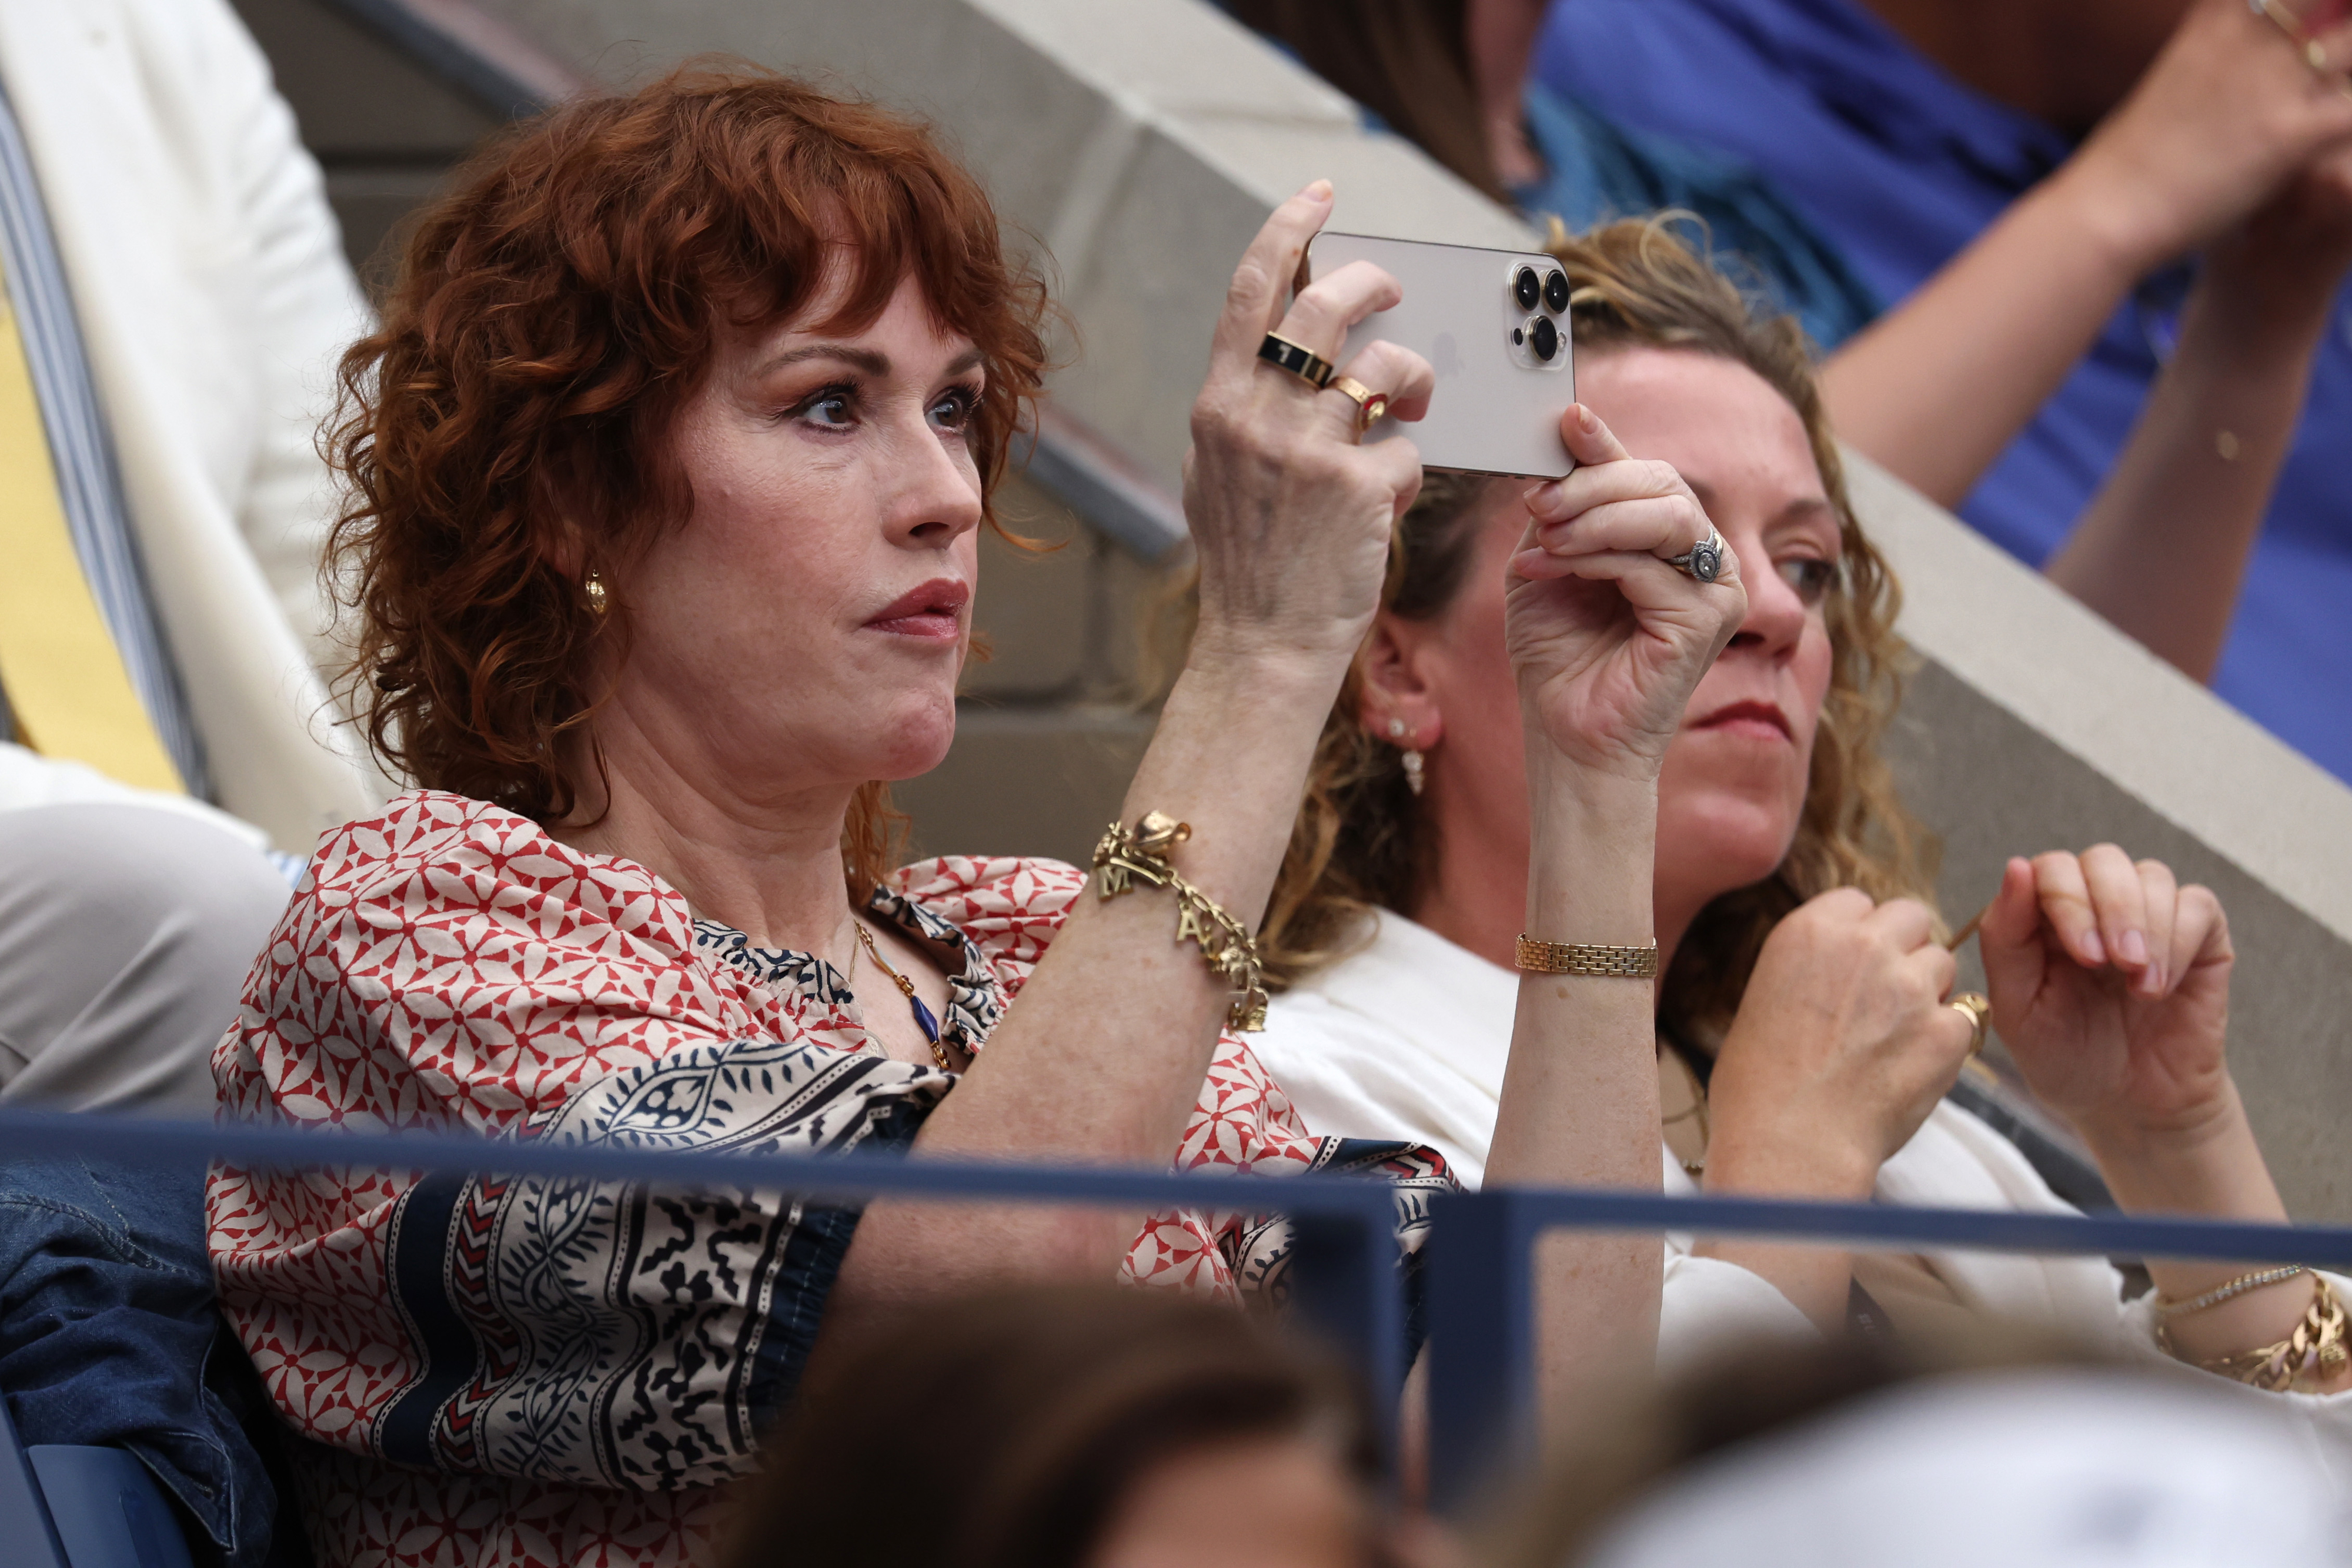 Molly Ringwald taking a photo of the match